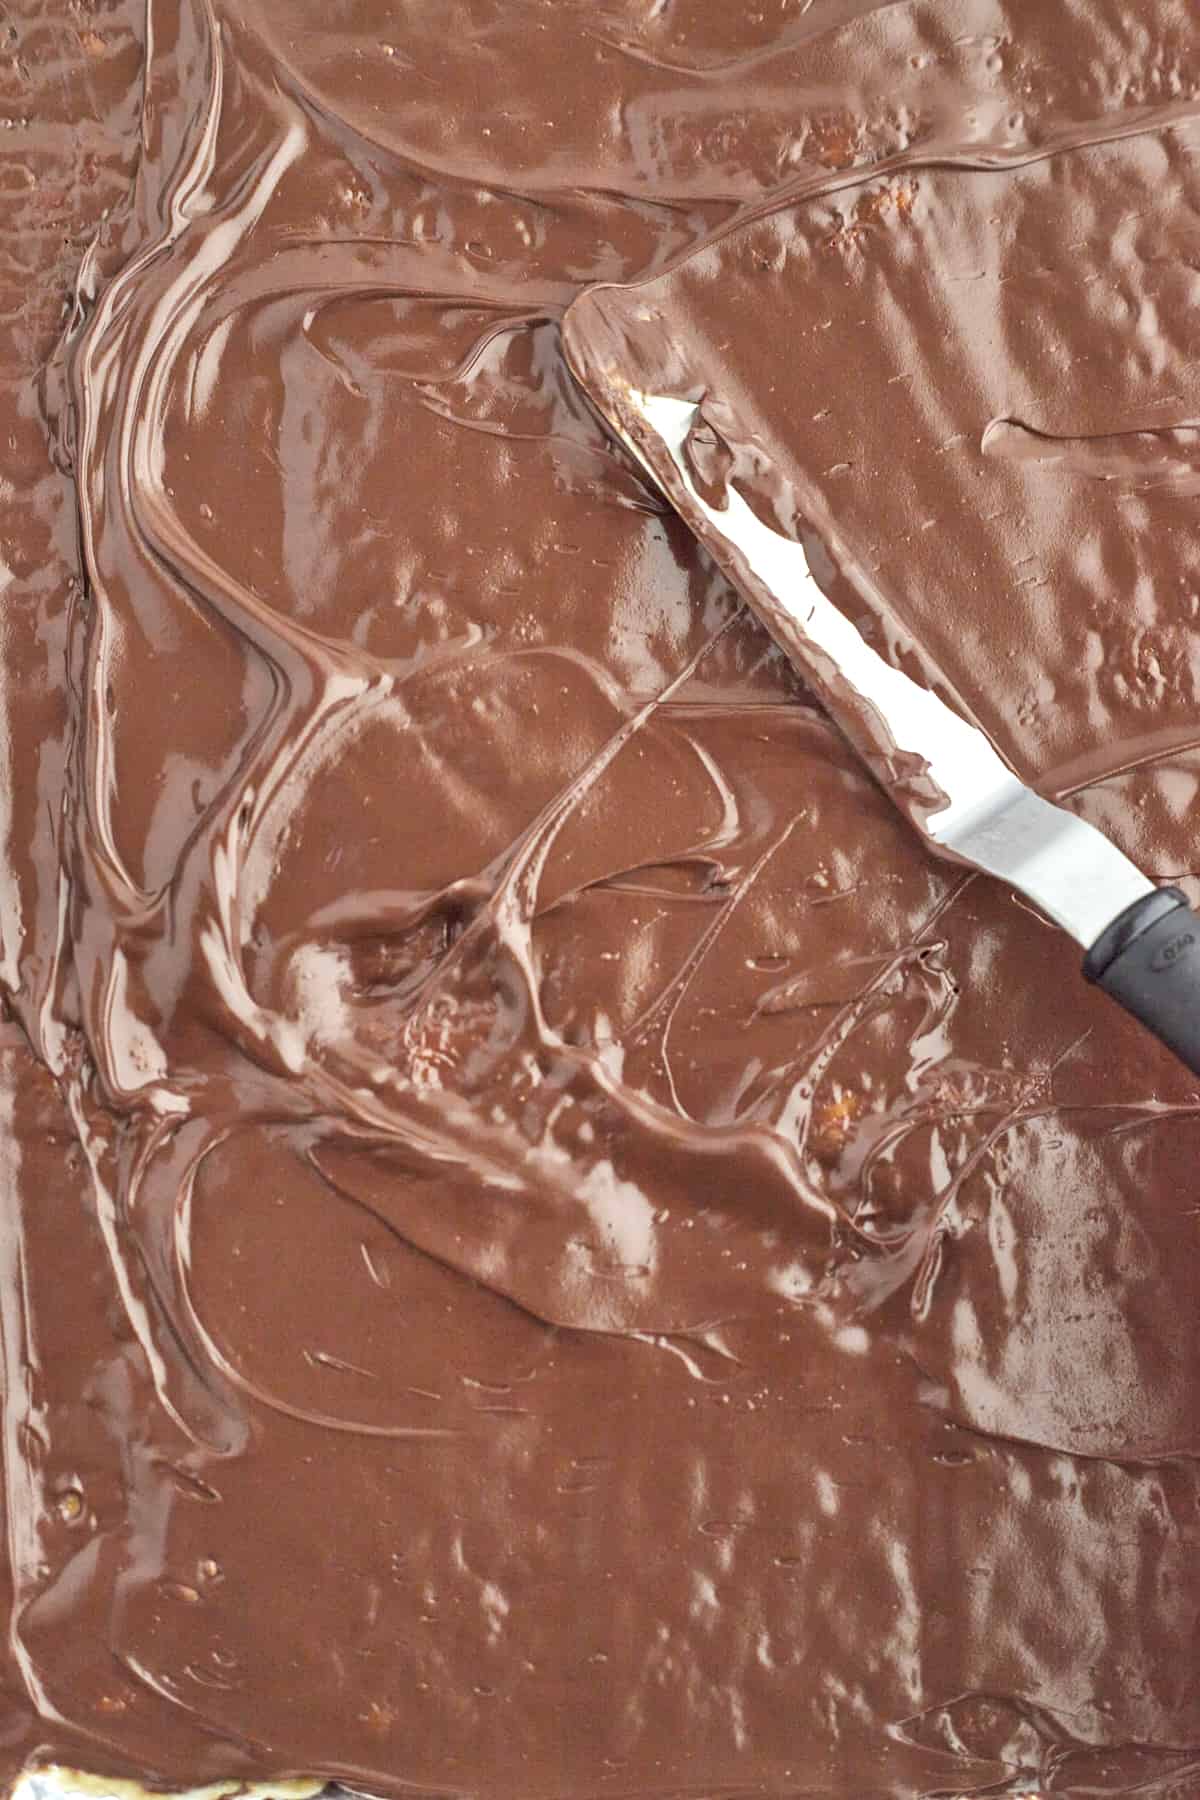 melted chocolate being smoothed over caramel covered saltine crackers to make crack candy